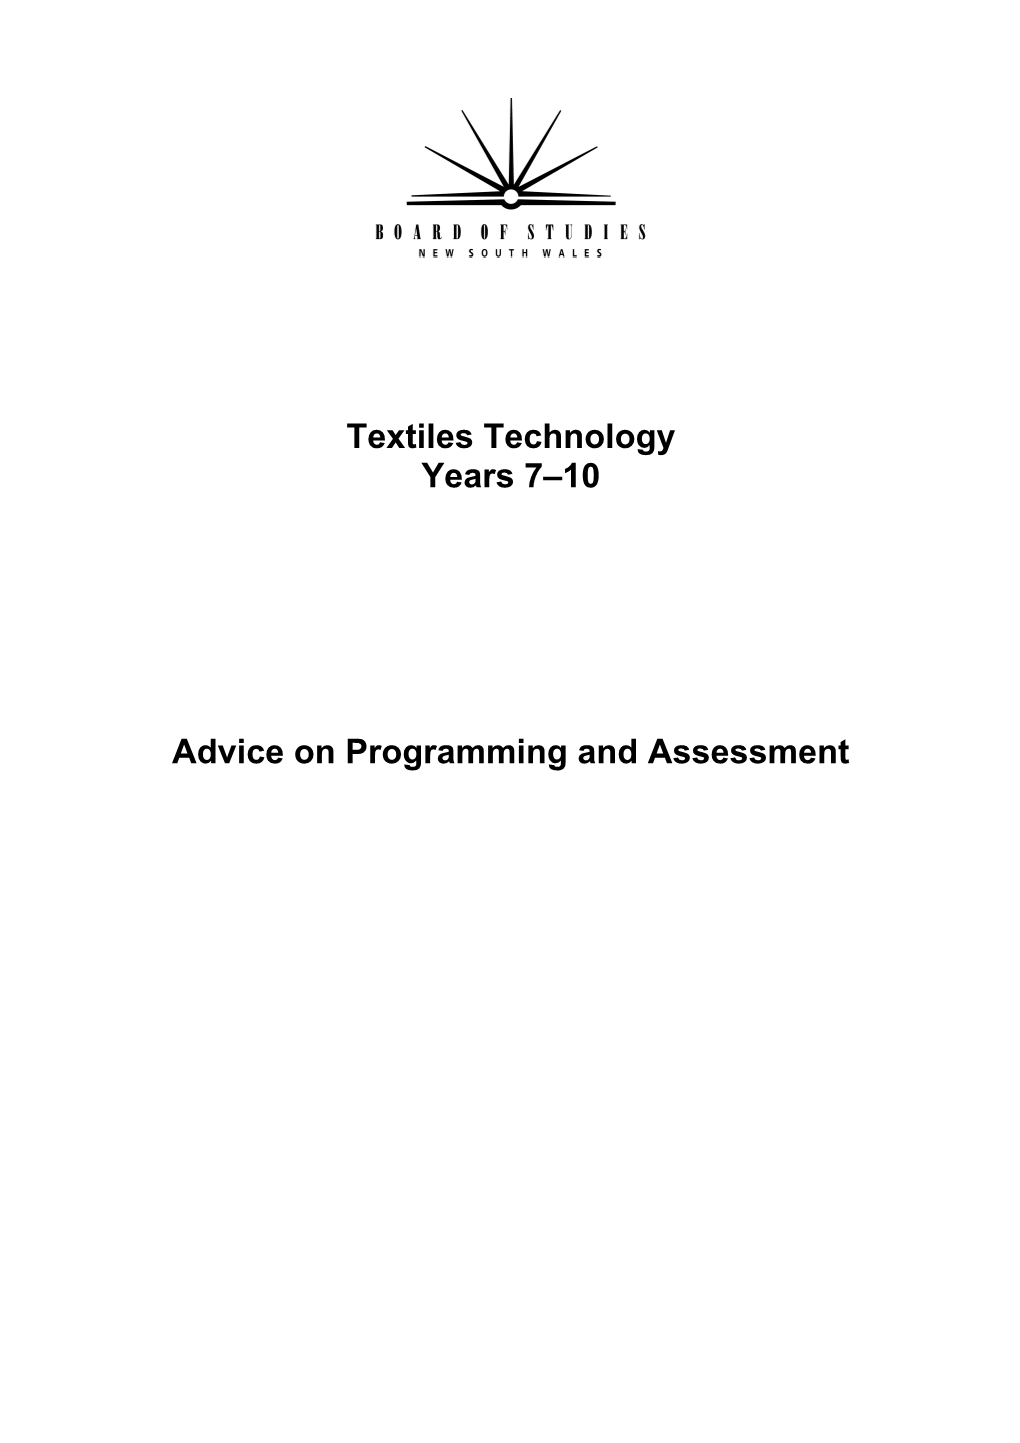 Advice on Programming and Assessment s2